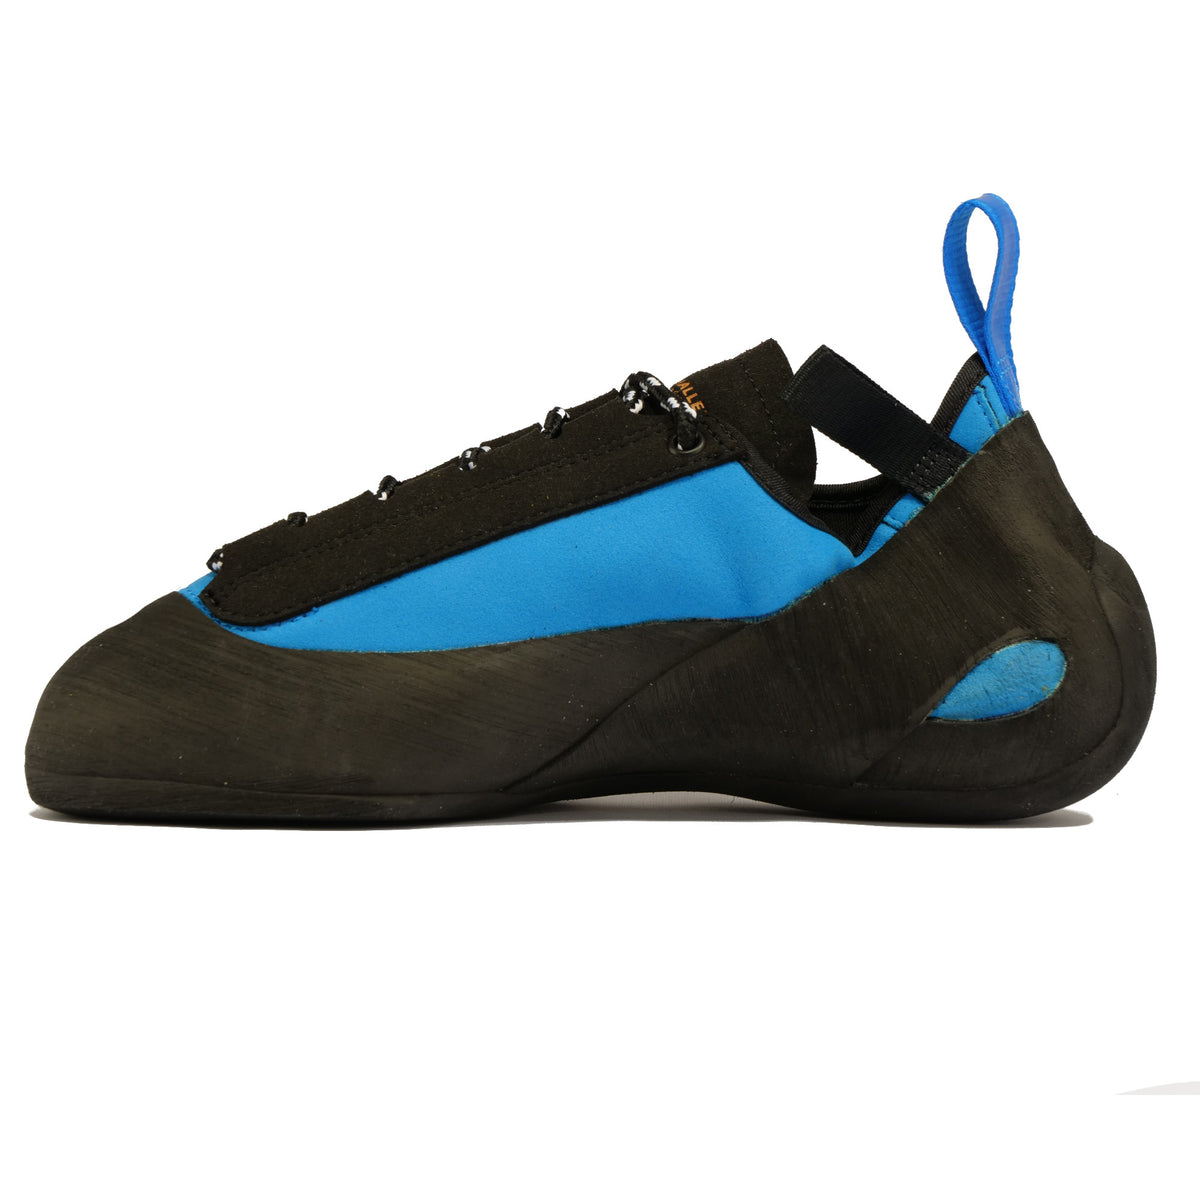 outer side view of the Unparallel Up Lace shoe in Blue and black with rear blue pull tab